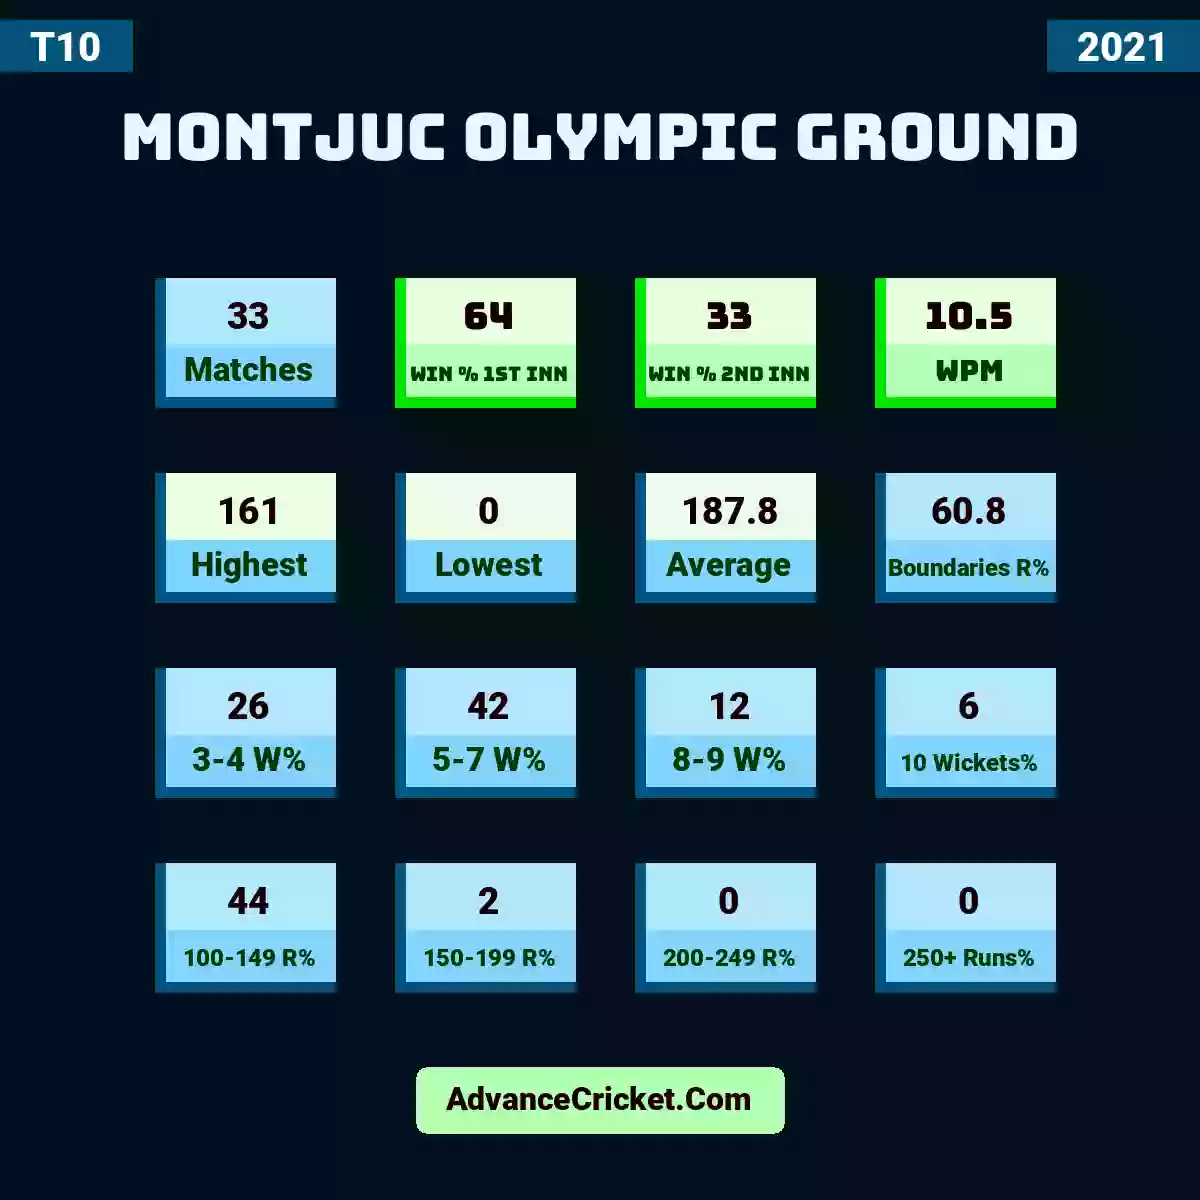 Image showing Montjuc Olympic Ground with Matches: 33, Win % 1st Inn: 64, Win % 2nd Inn: 33, WPM: 10.5, Highest: 161, Lowest: 0, Average: 187.8, Boundaries R%: 60.8, 3-4 W%: 26, 5-7 W%: 42, 8-9 W%: 12, 10 Wickets%: 6, 100-149 R%: 44, 150-199 R%: 2, 200-249 R%: 0, 250+ Runs%: 0.